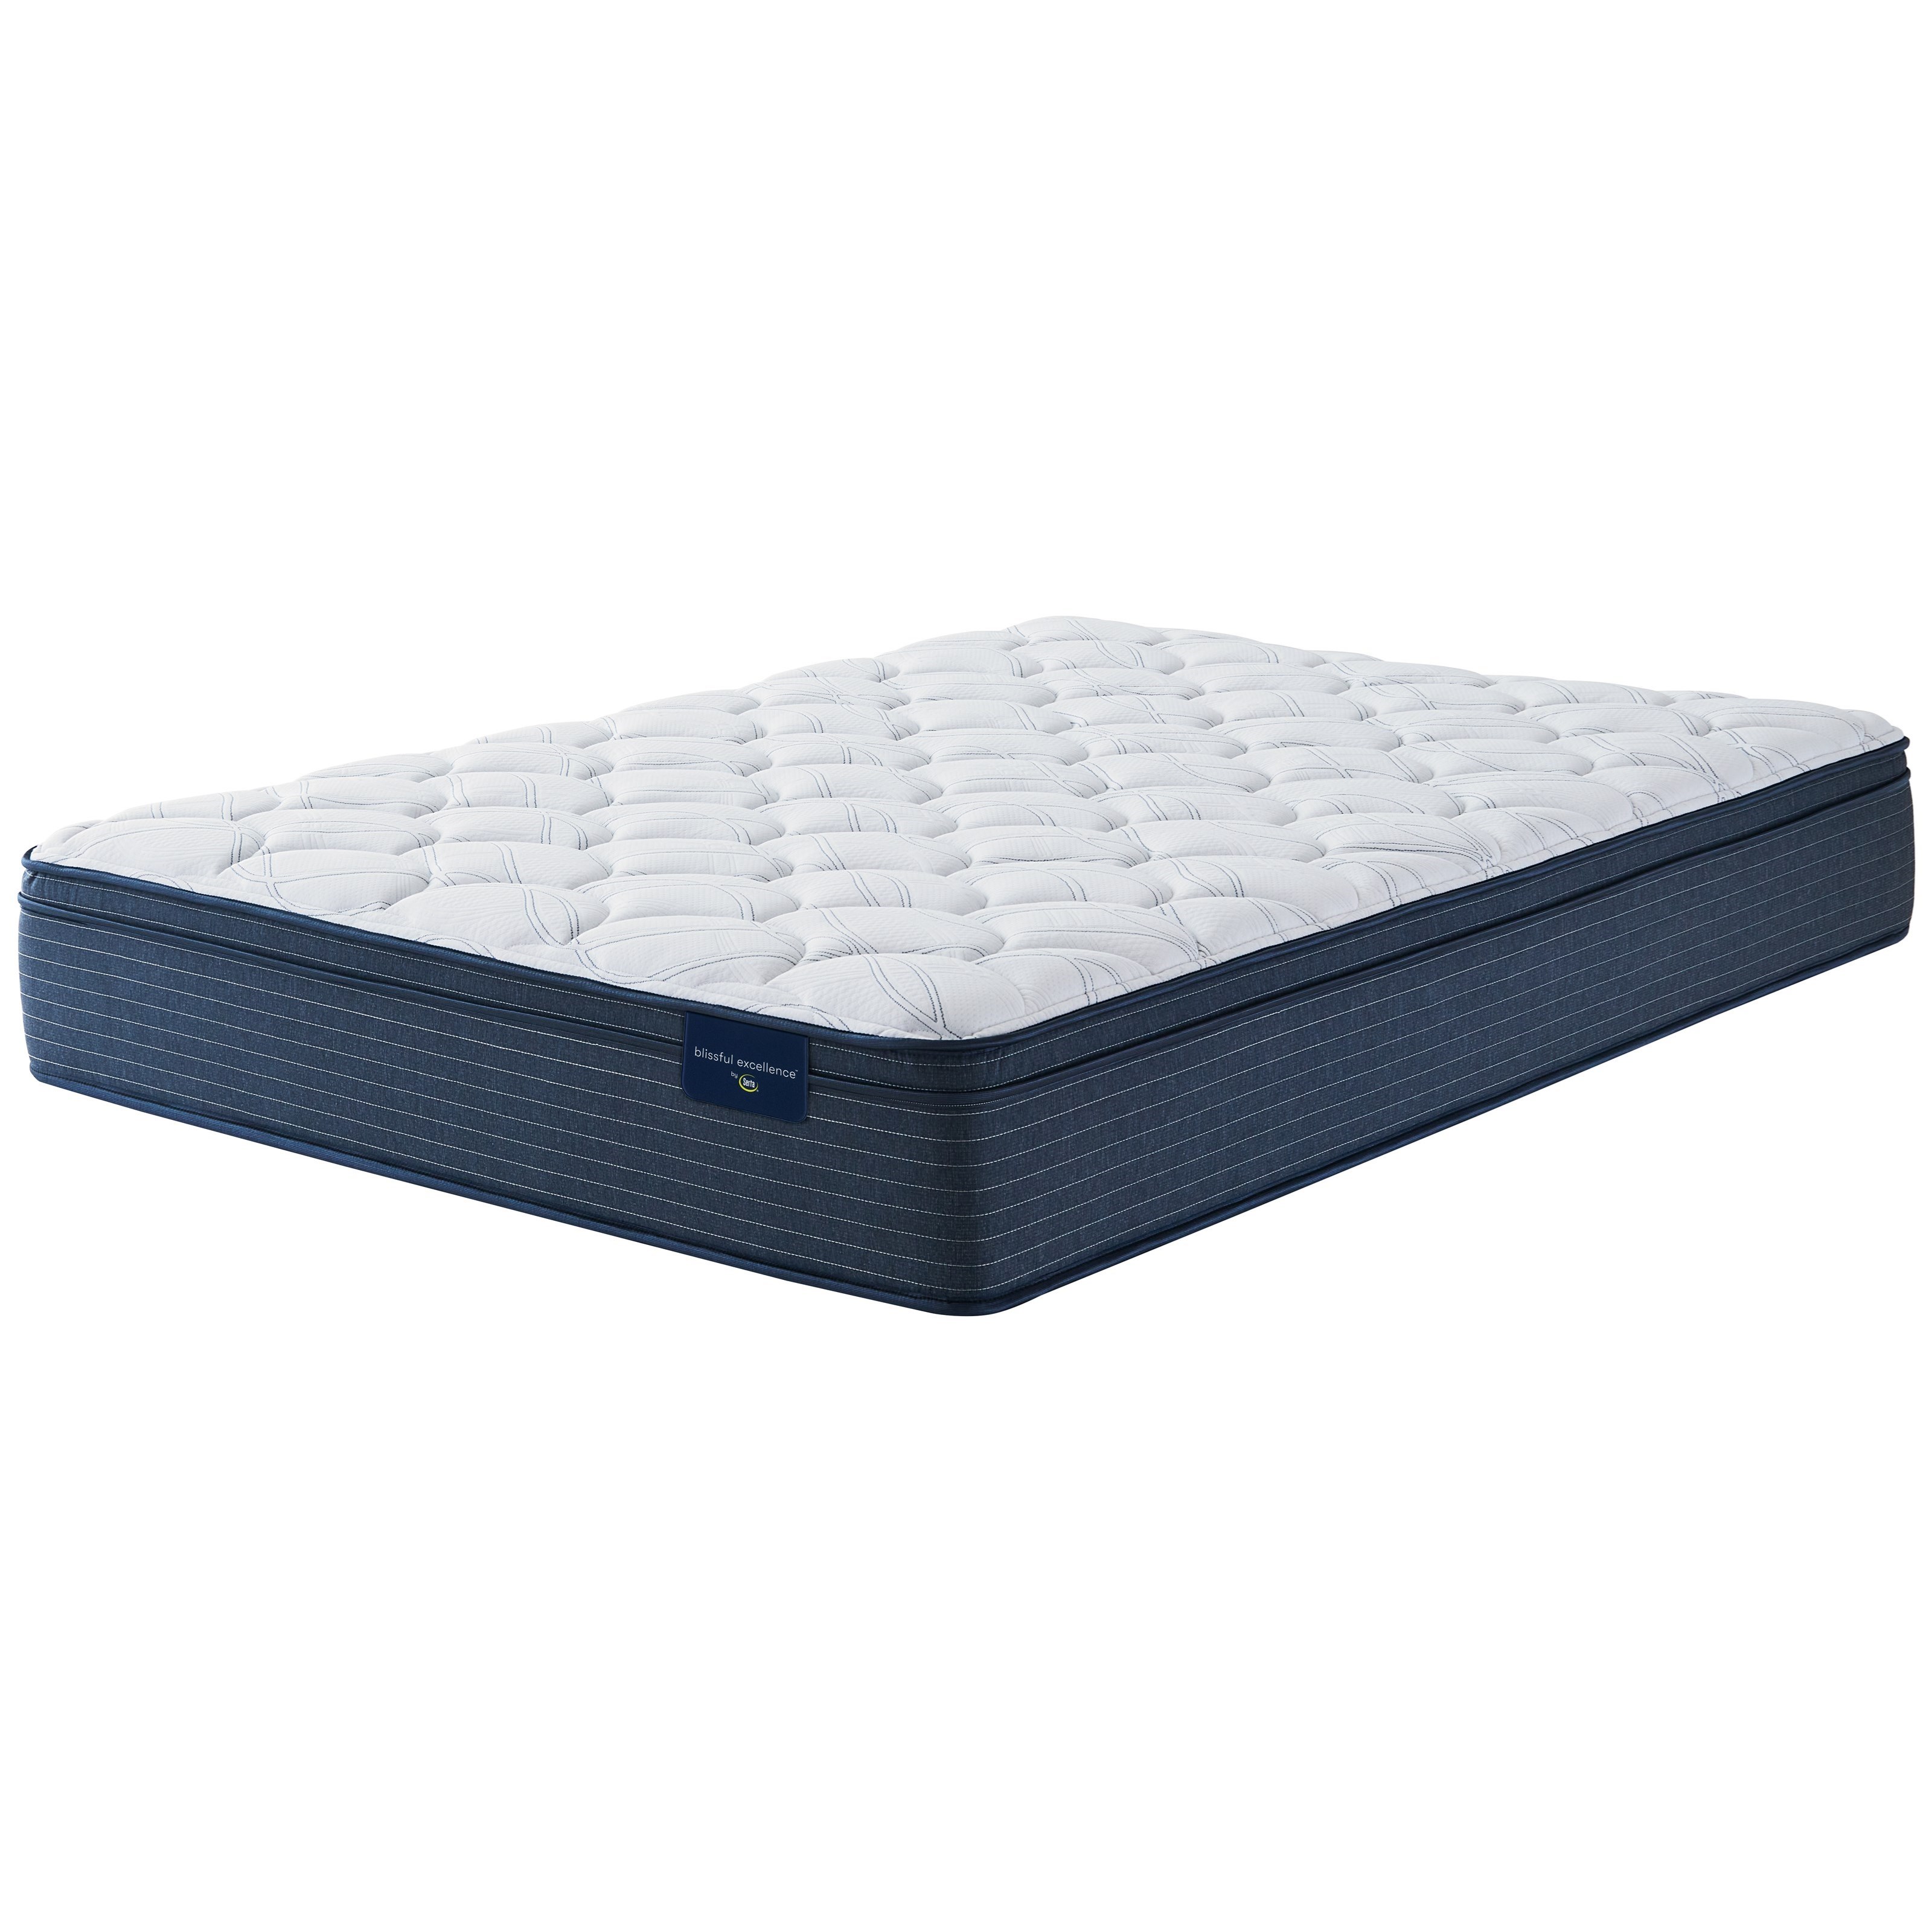 King 12" Euro Top Wrapped Coil Mattress